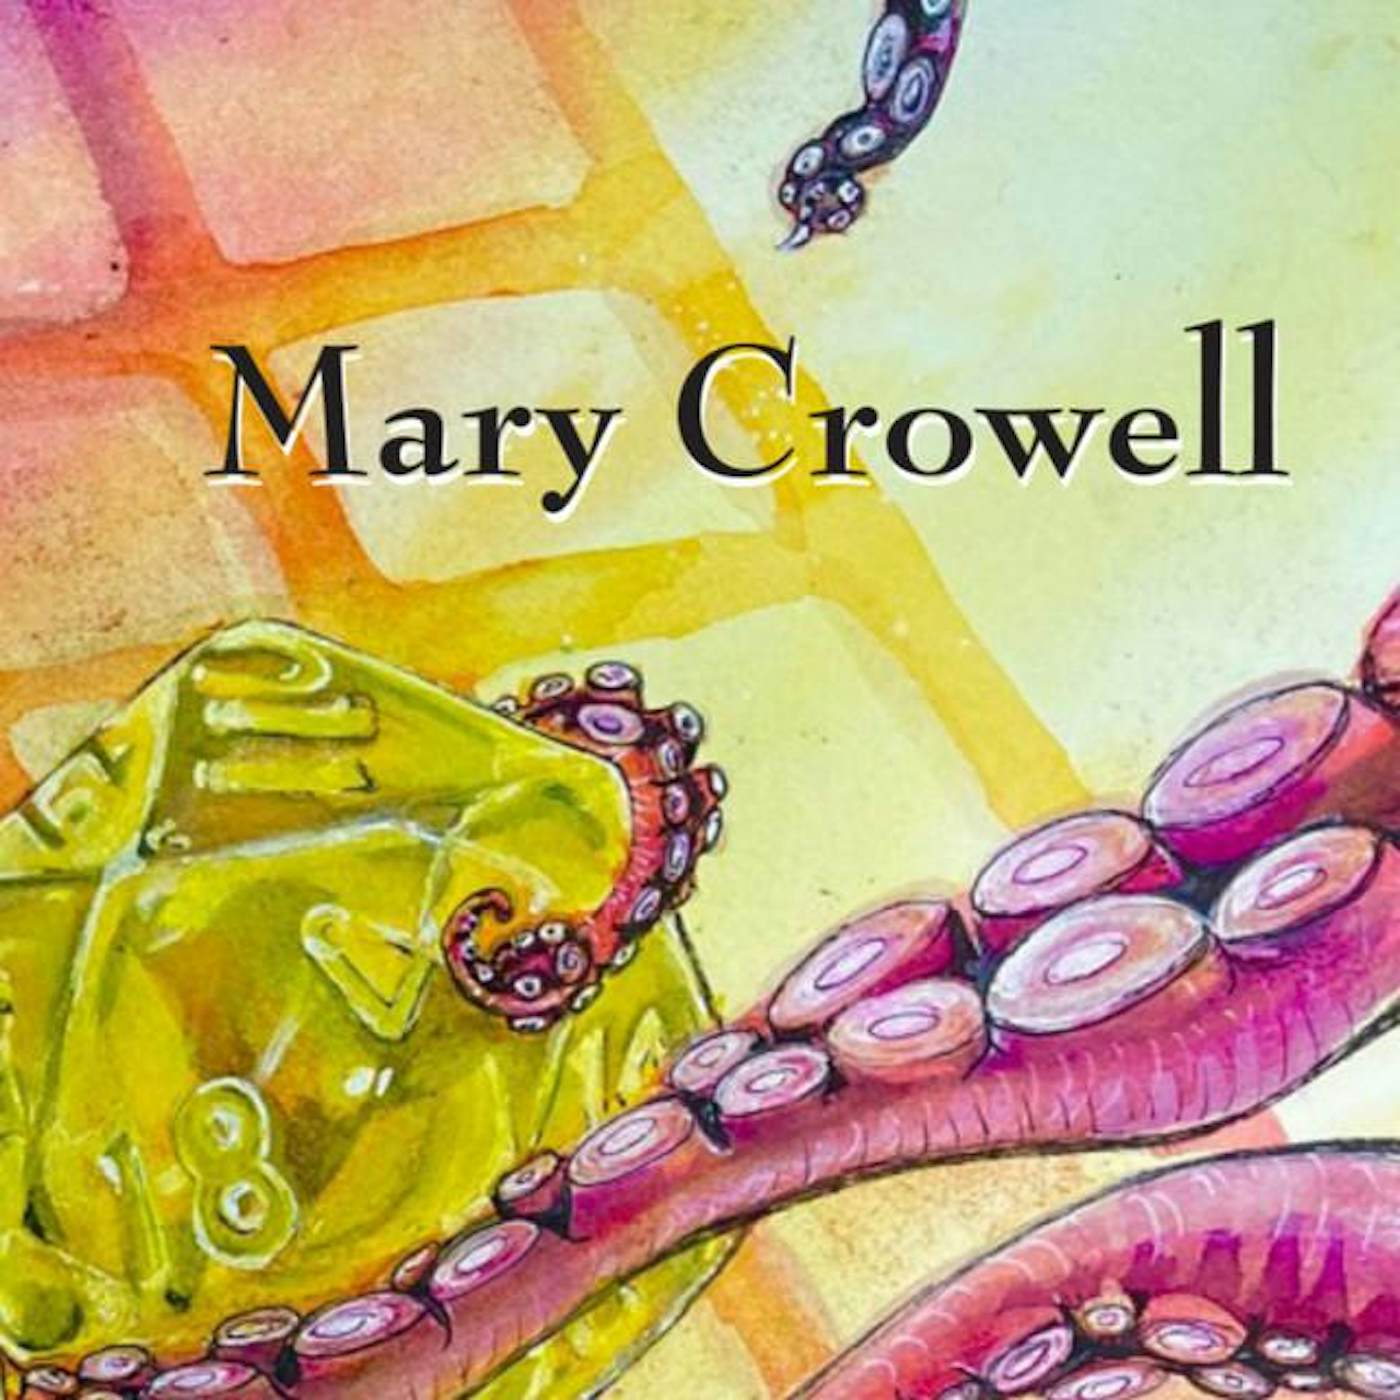 Mary Crowell